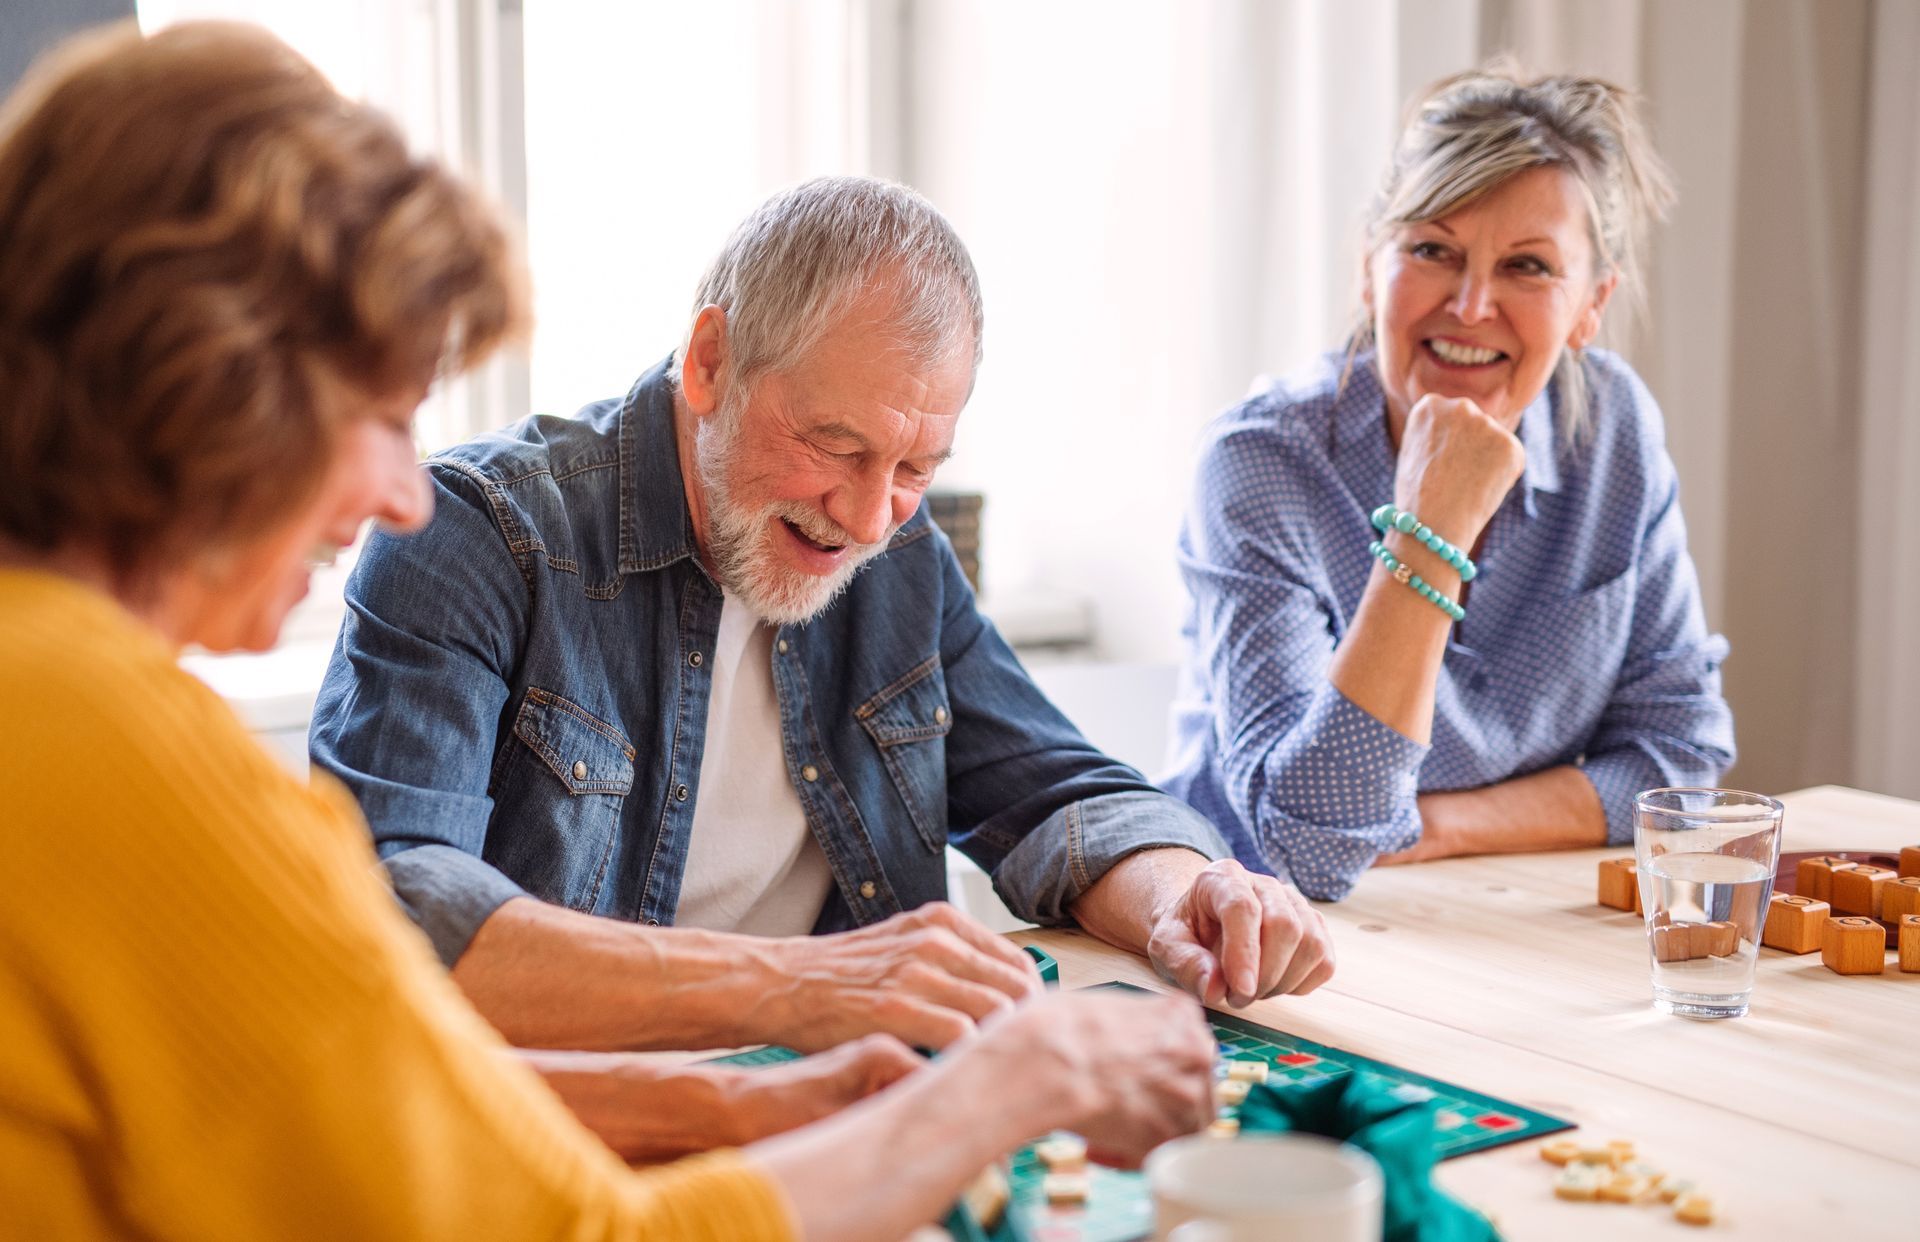 A group of elderly people are sitting at a table playing a board game.